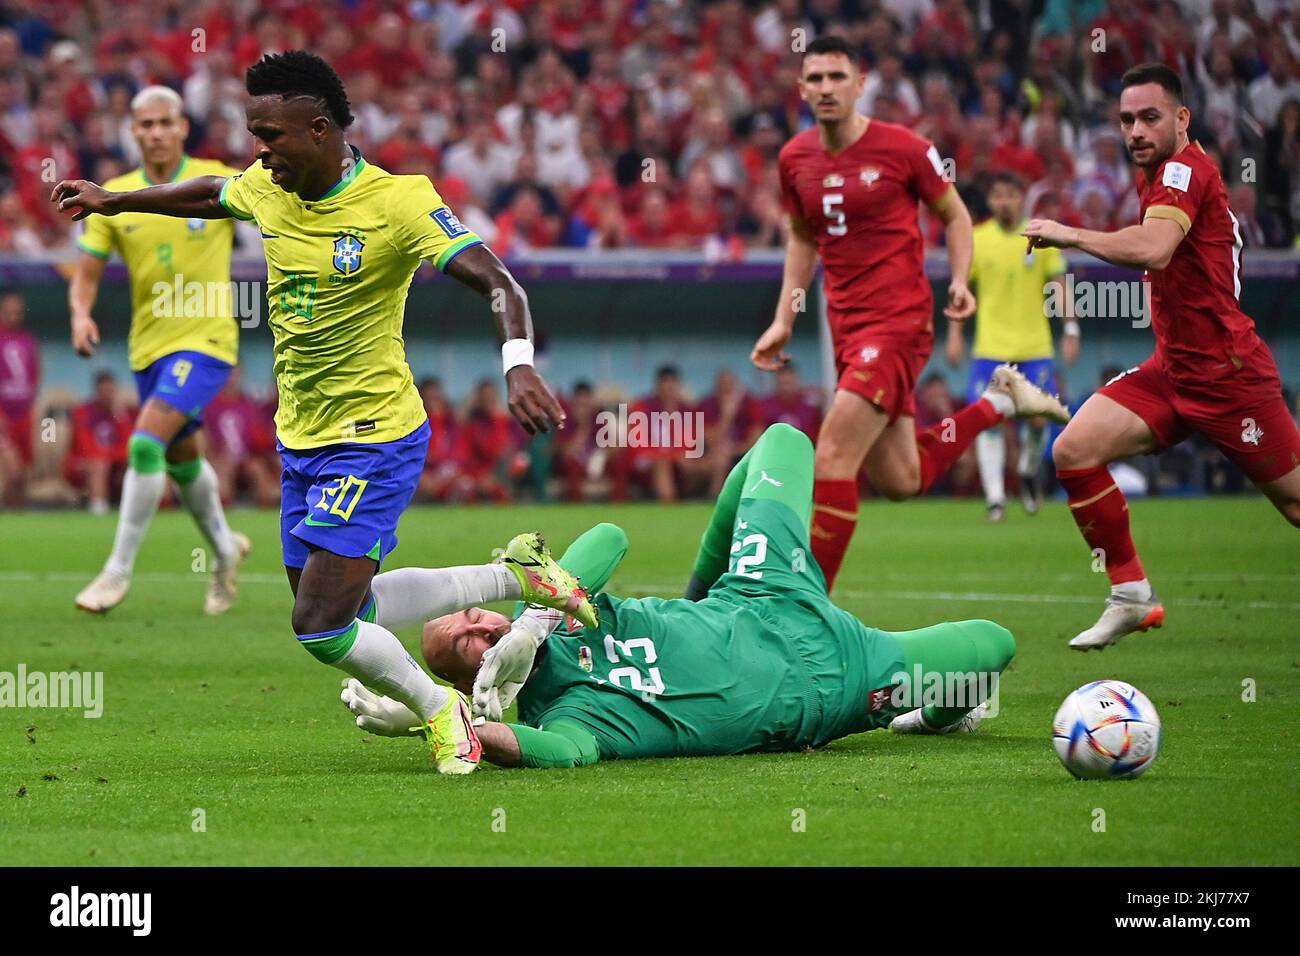 Lusail, Qatar. 24th Nov, 2022. Vinicius Junior (L) of Brazil competes during the Group G match between Brazil and Serbia at the 2022 FIFA World Cup at Lusail Stadium in Lusail, Qatar, Nov. 24, 2022. Credit: Chen Cheng/Xinhua/Alamy Live News Stock Photo